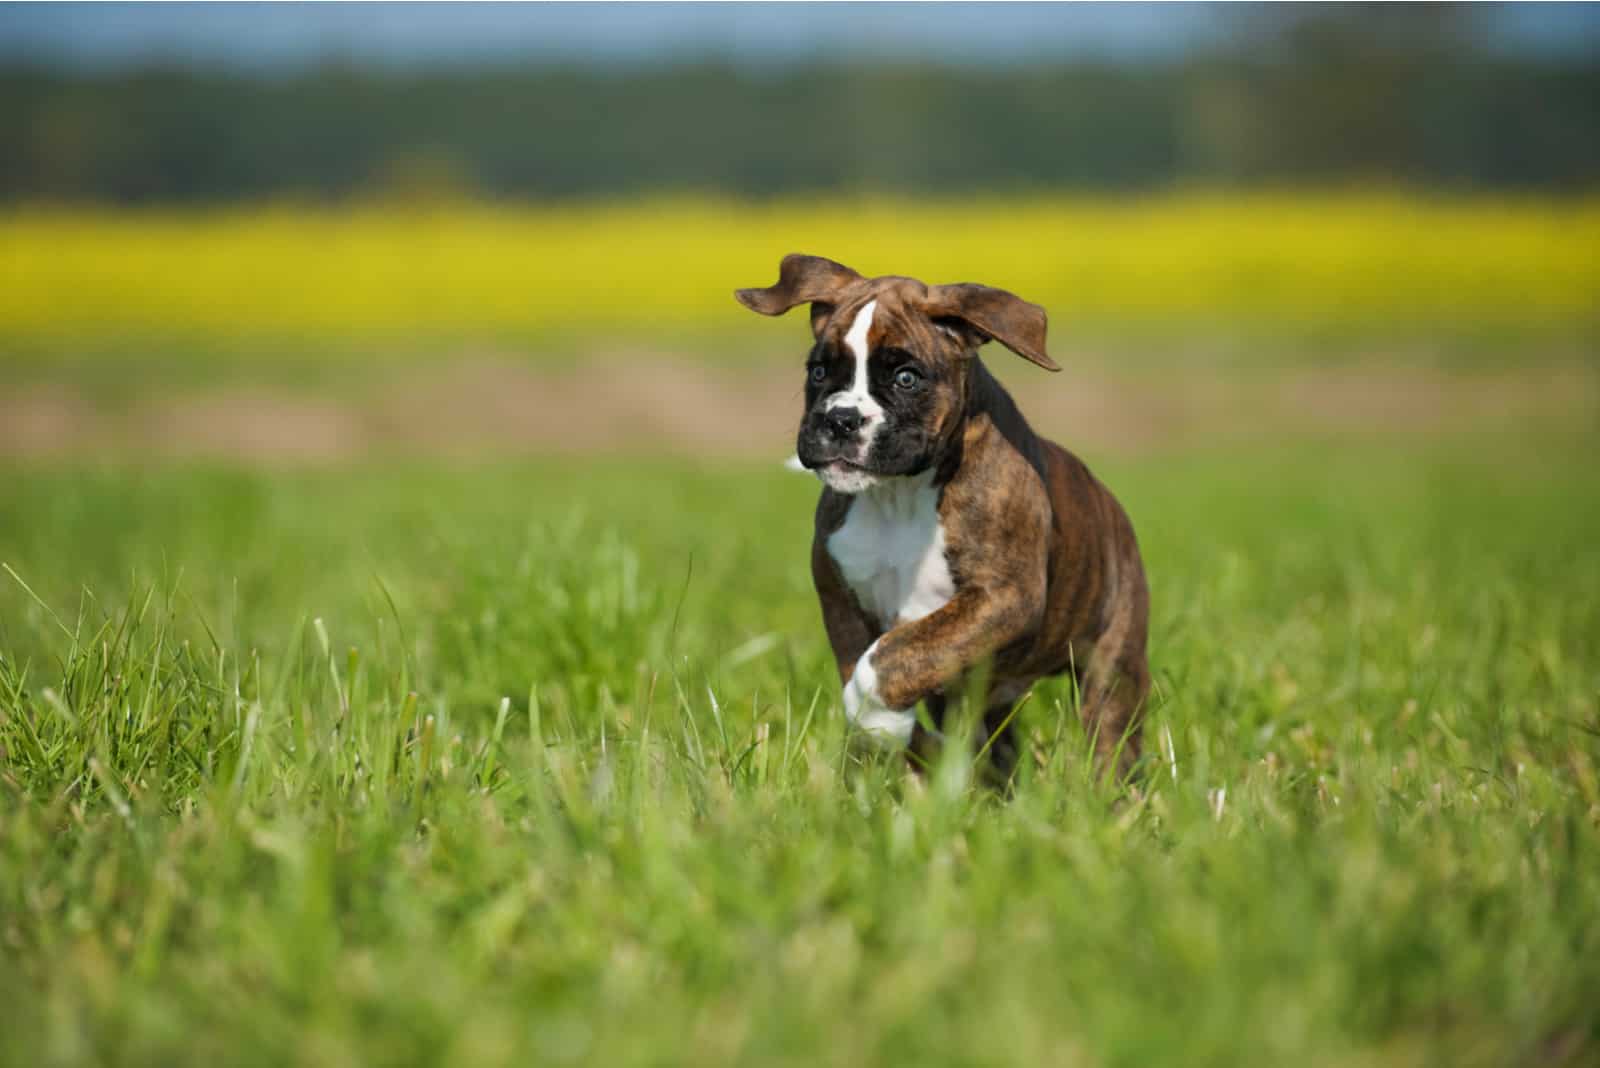 Running boxer puppy in a meadow